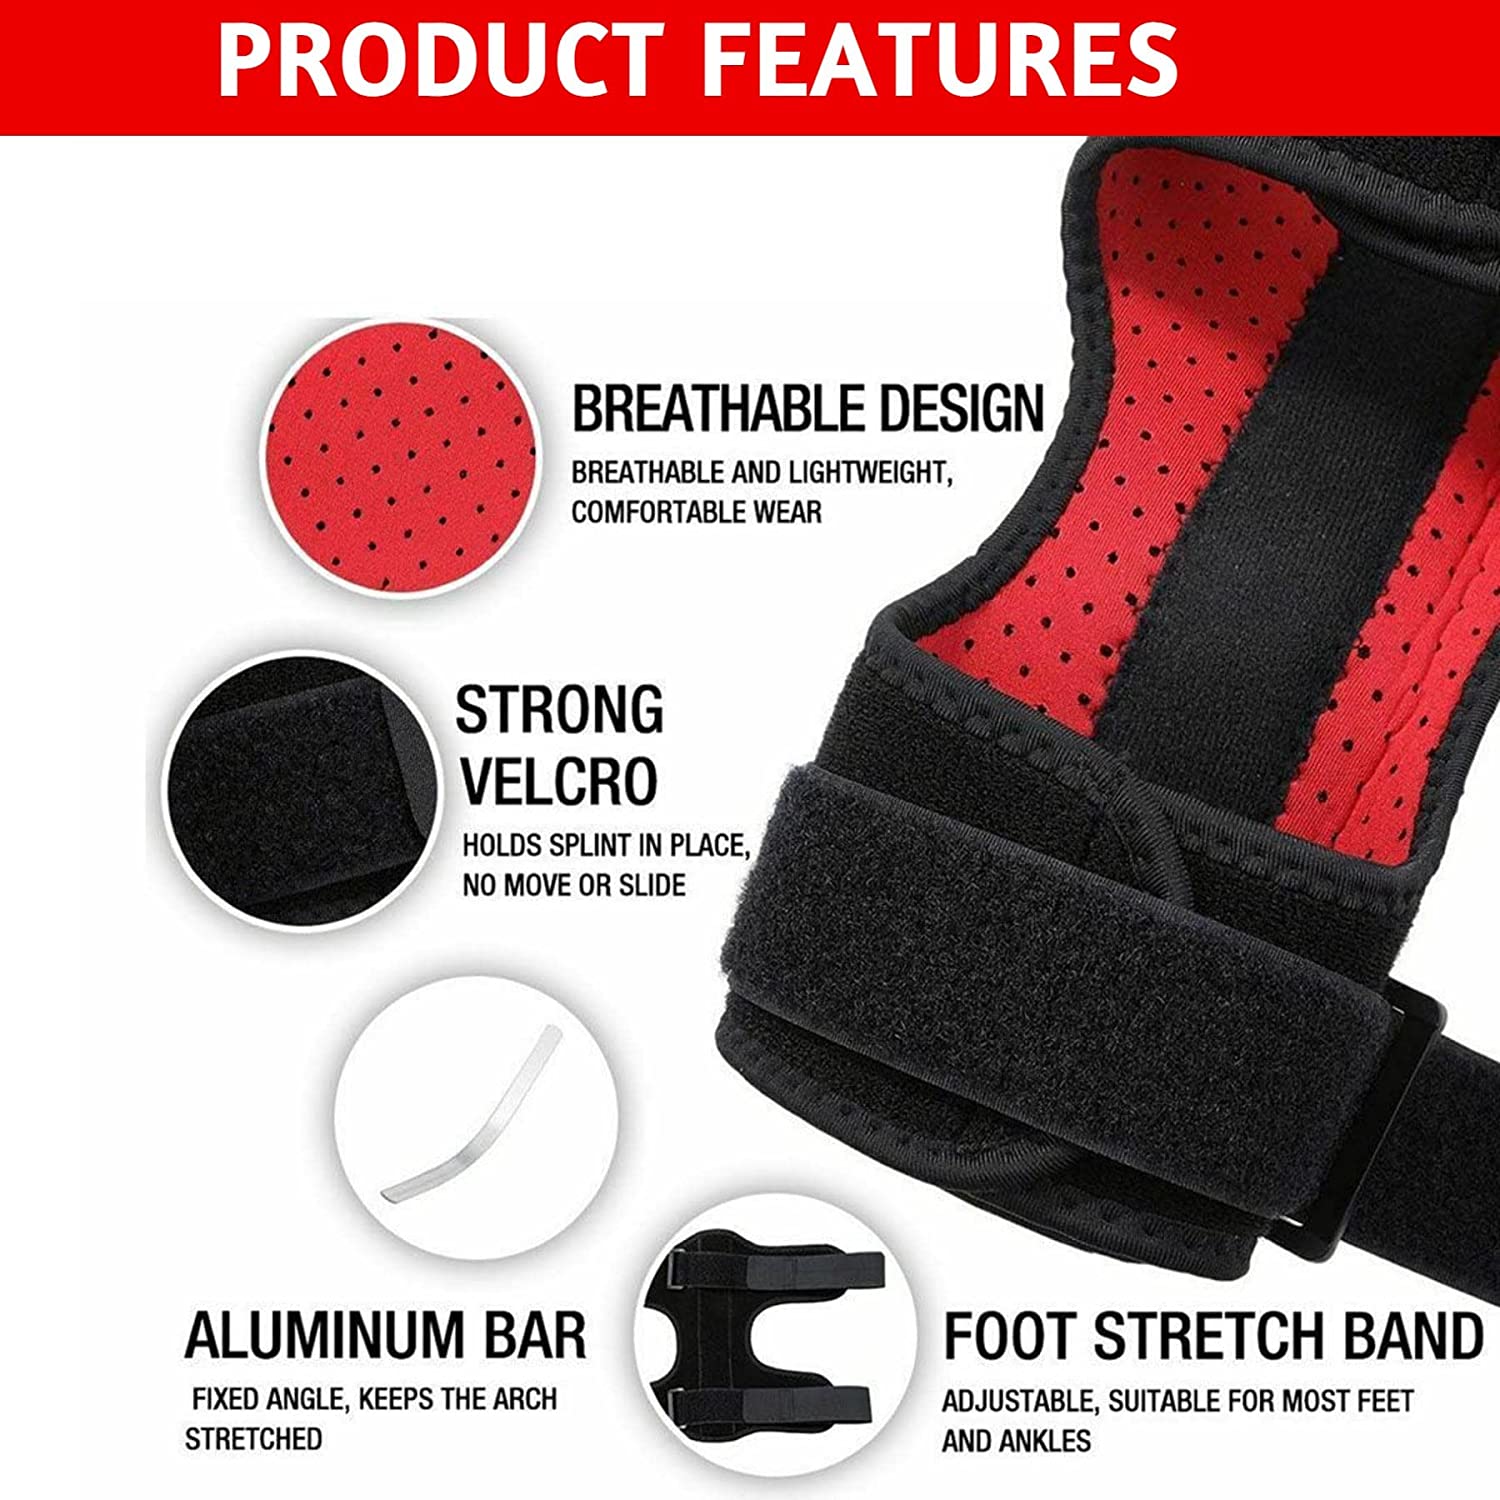 NUCARTURE Plantar Fasciitis Night Splint for Heel Pain Relief - Foot Drop Orthotic Brace for Sleep Support, Fits for Both Left and Right Foot